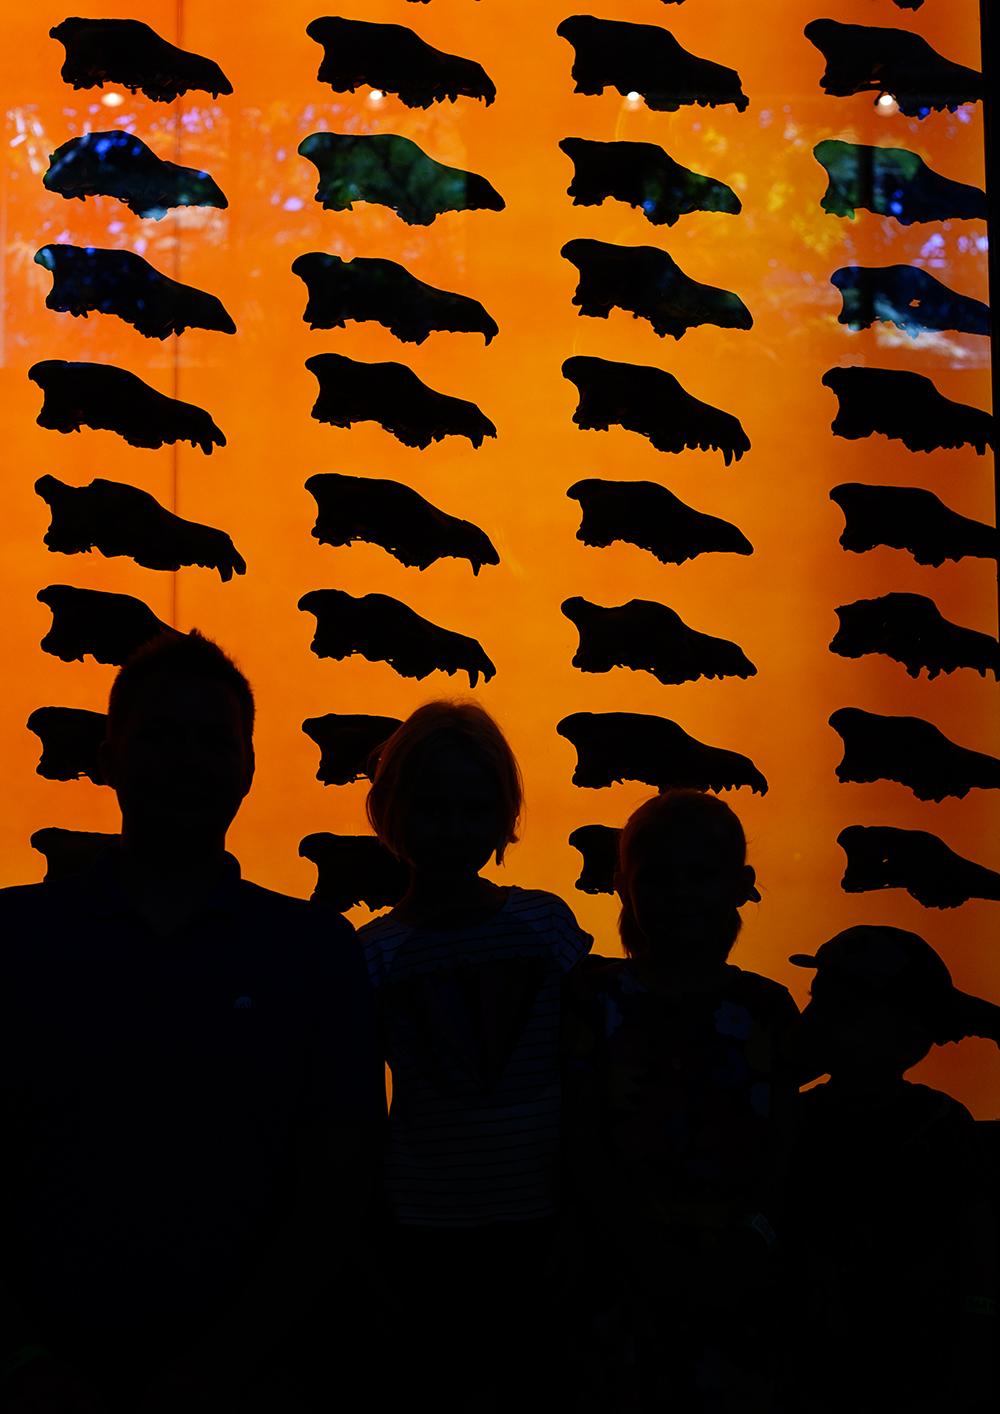 some highlights from our family trip to Los Angeles: La Brea Tar Pits